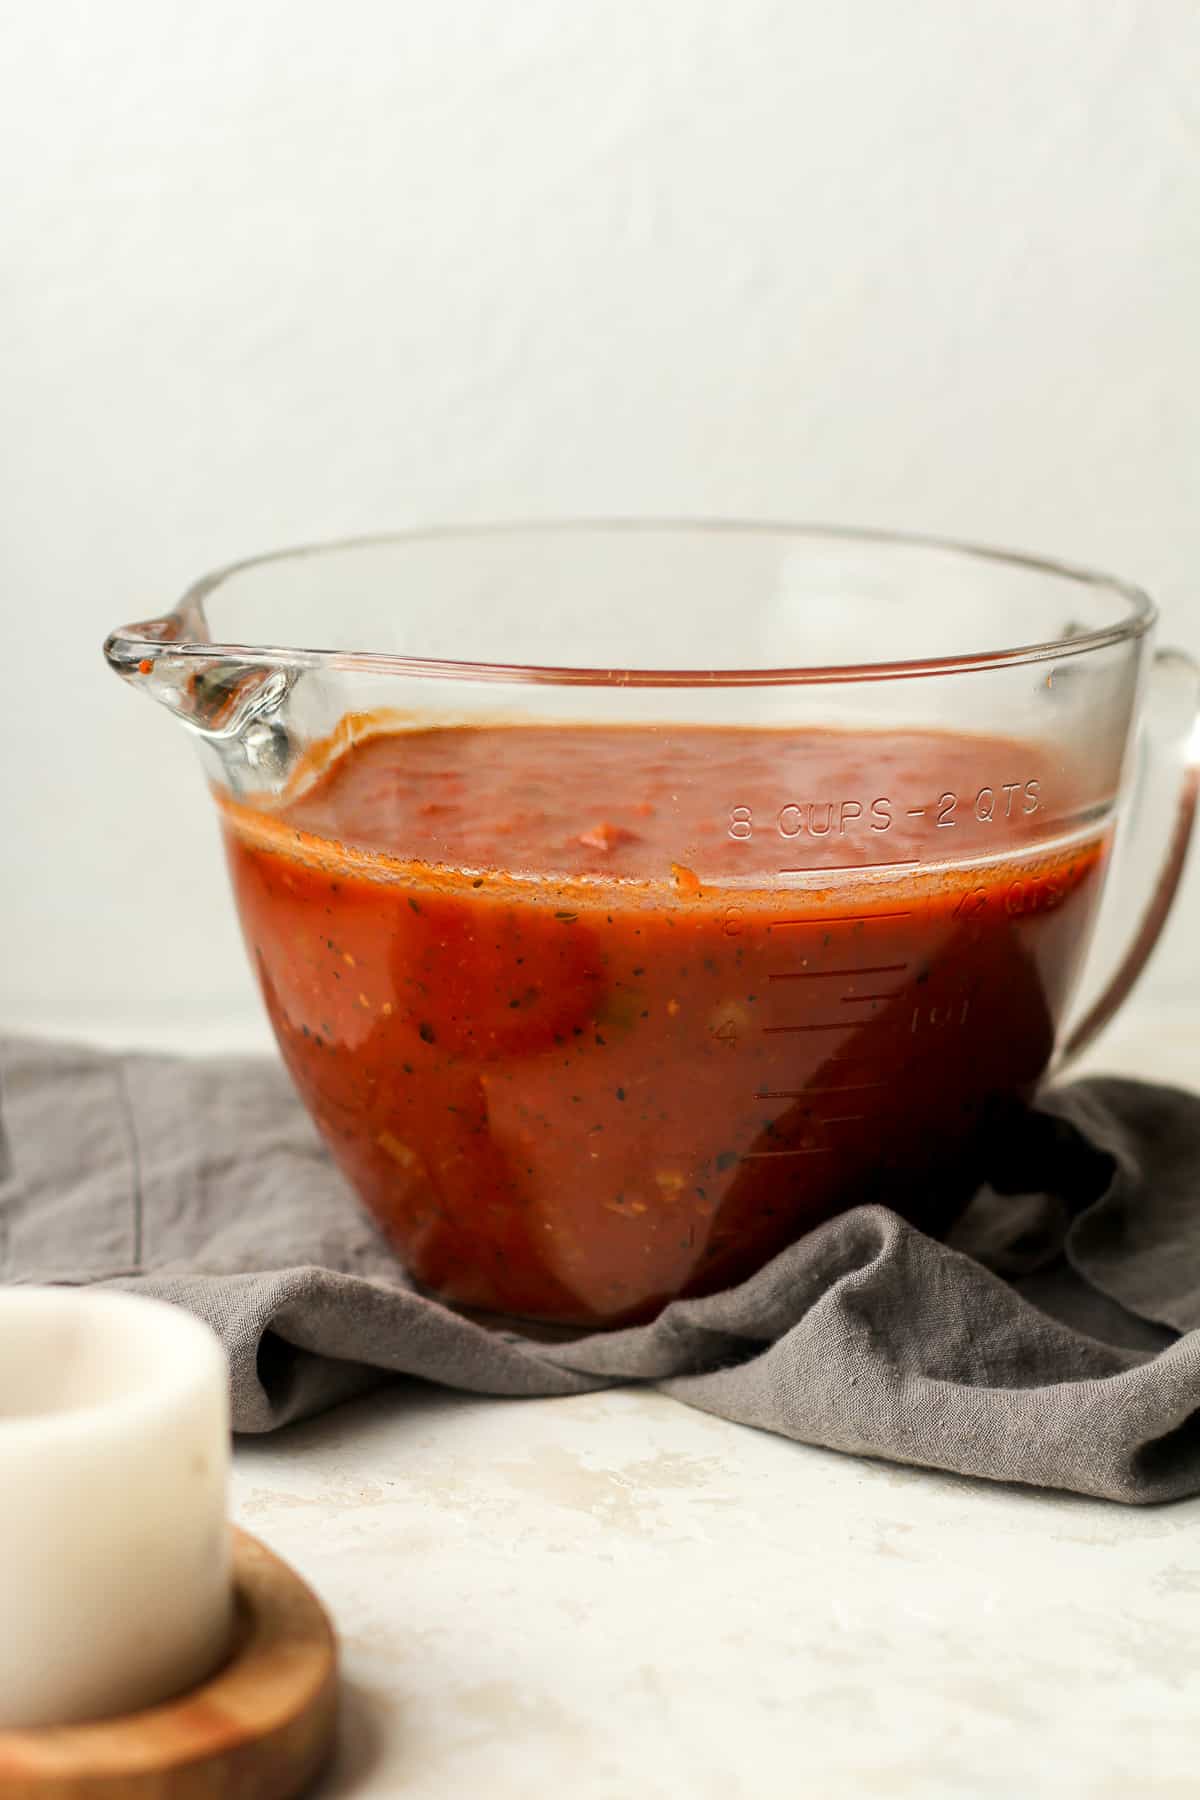 A large measuring cup of homemade sauce.